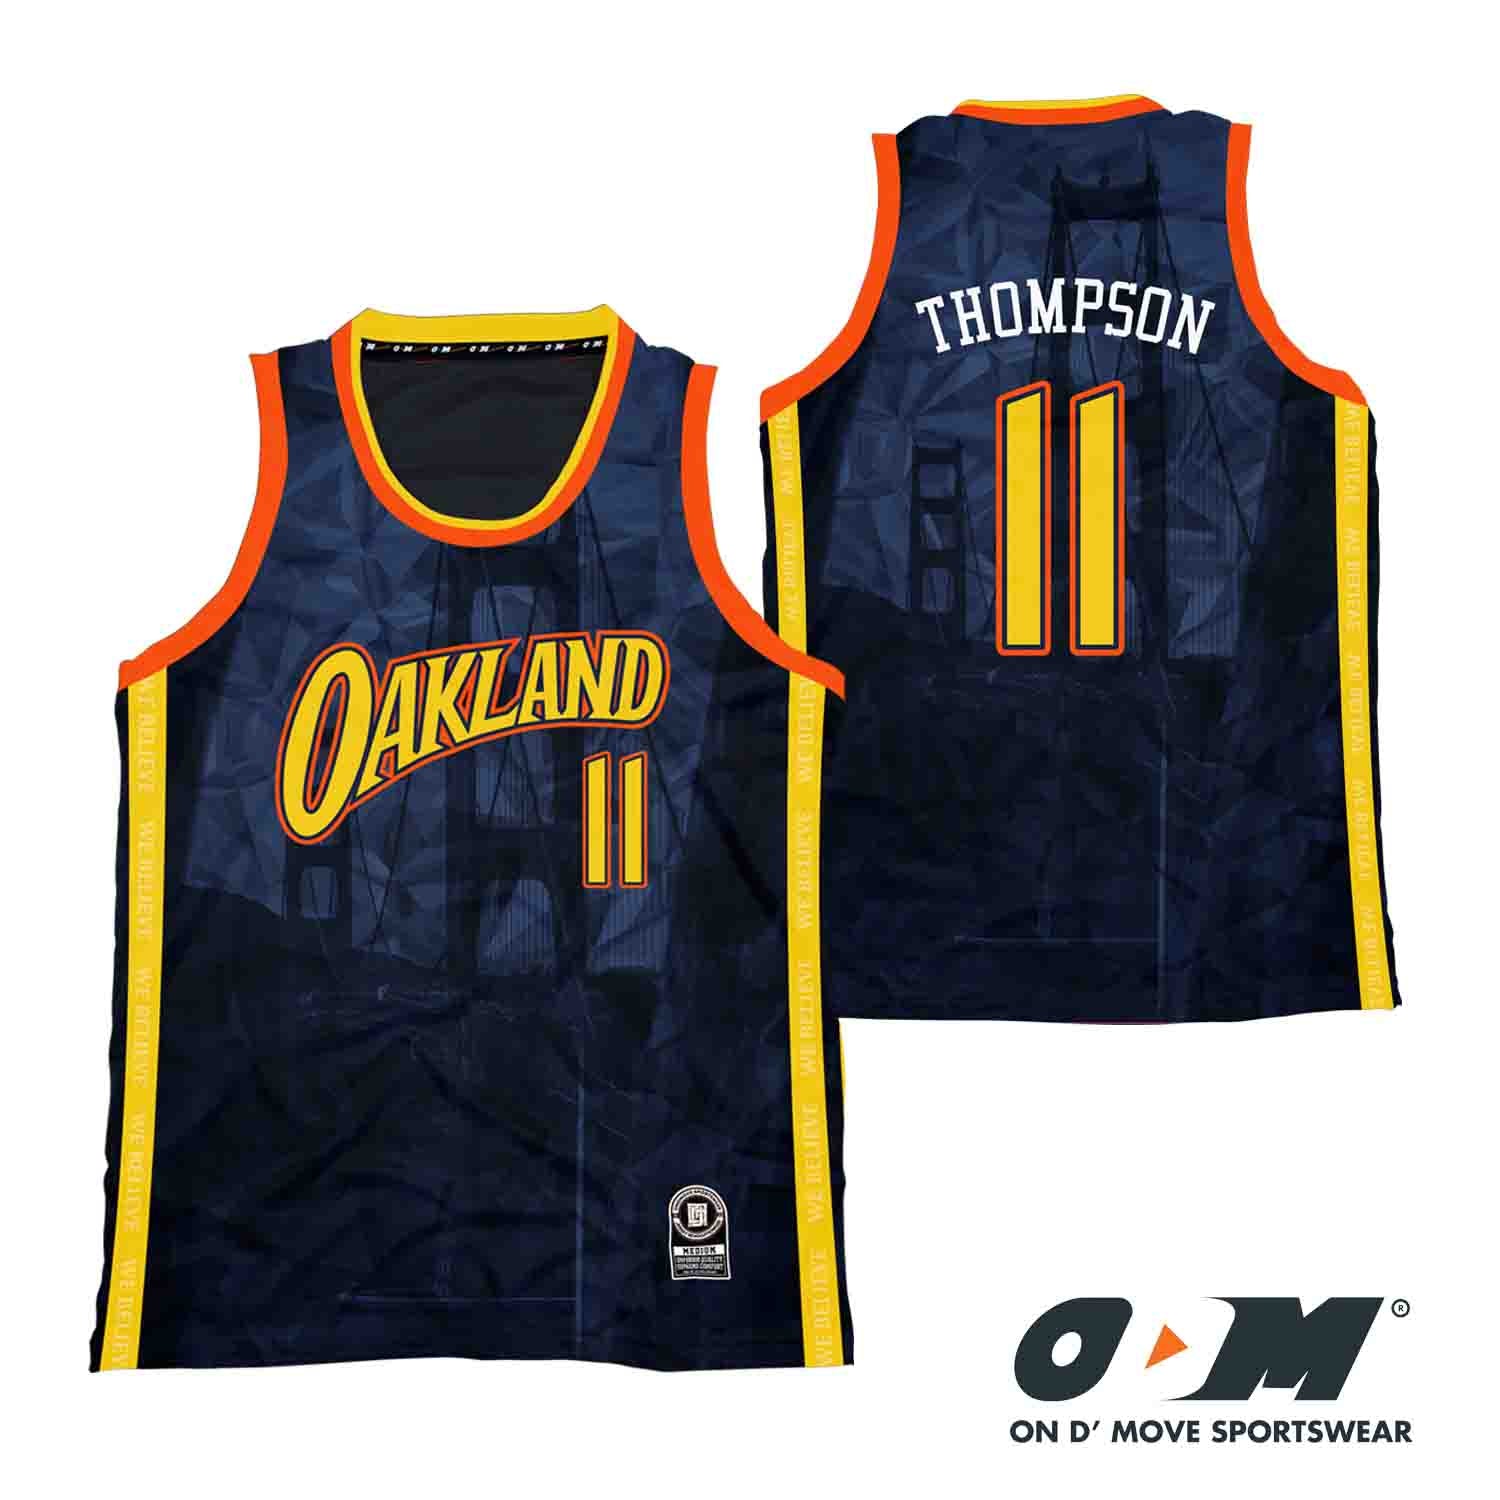 Klay Thompson Oakland Forever Jersey